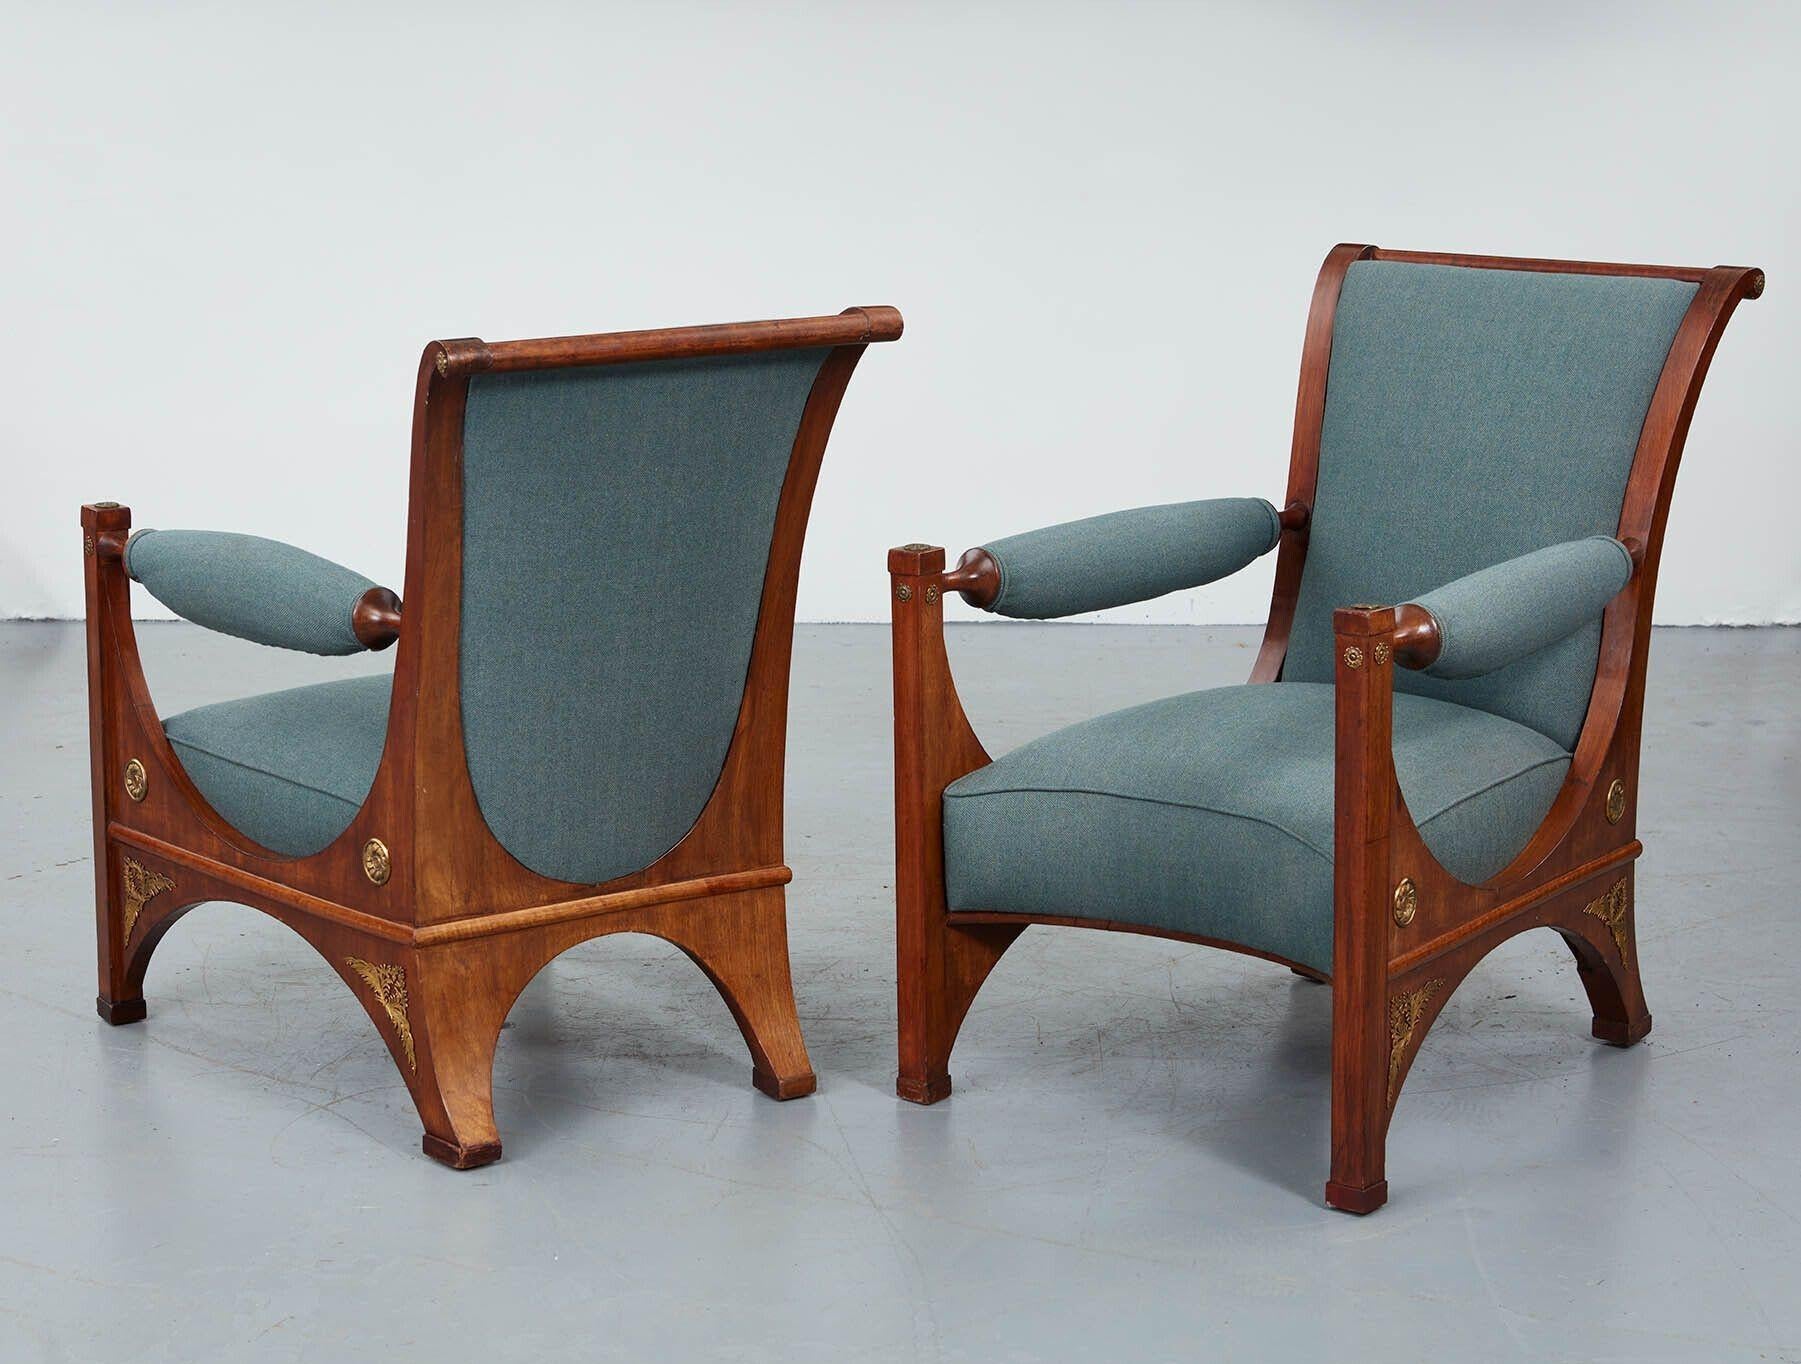 Pair of Northern European mahogany and bronze mounted Neoclassical armchairs of great scale and design, early 19th Century and in the Neo-Grecian manner, the slightly scrolled back over open arms, the upholstered seat over arched base with original